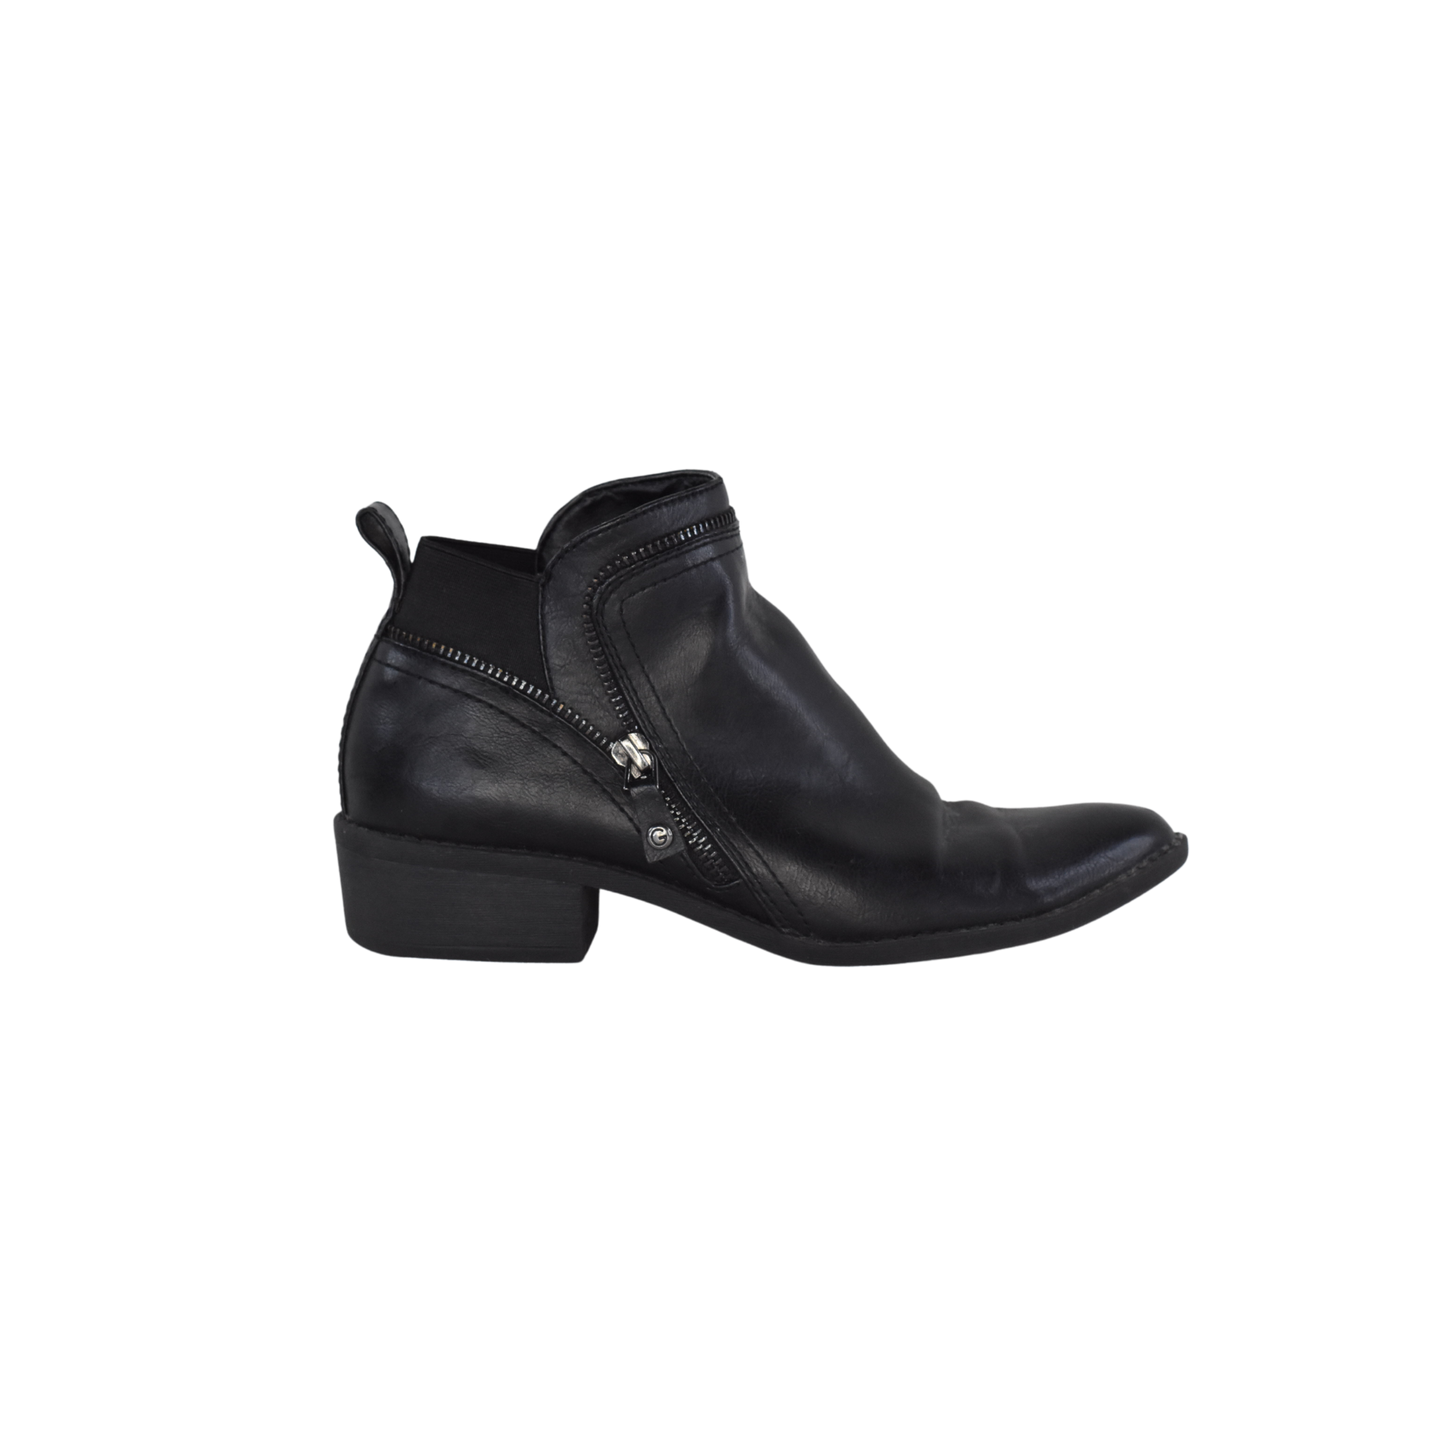 Guess Bootie Black Size 7.5M SKU 000091-4